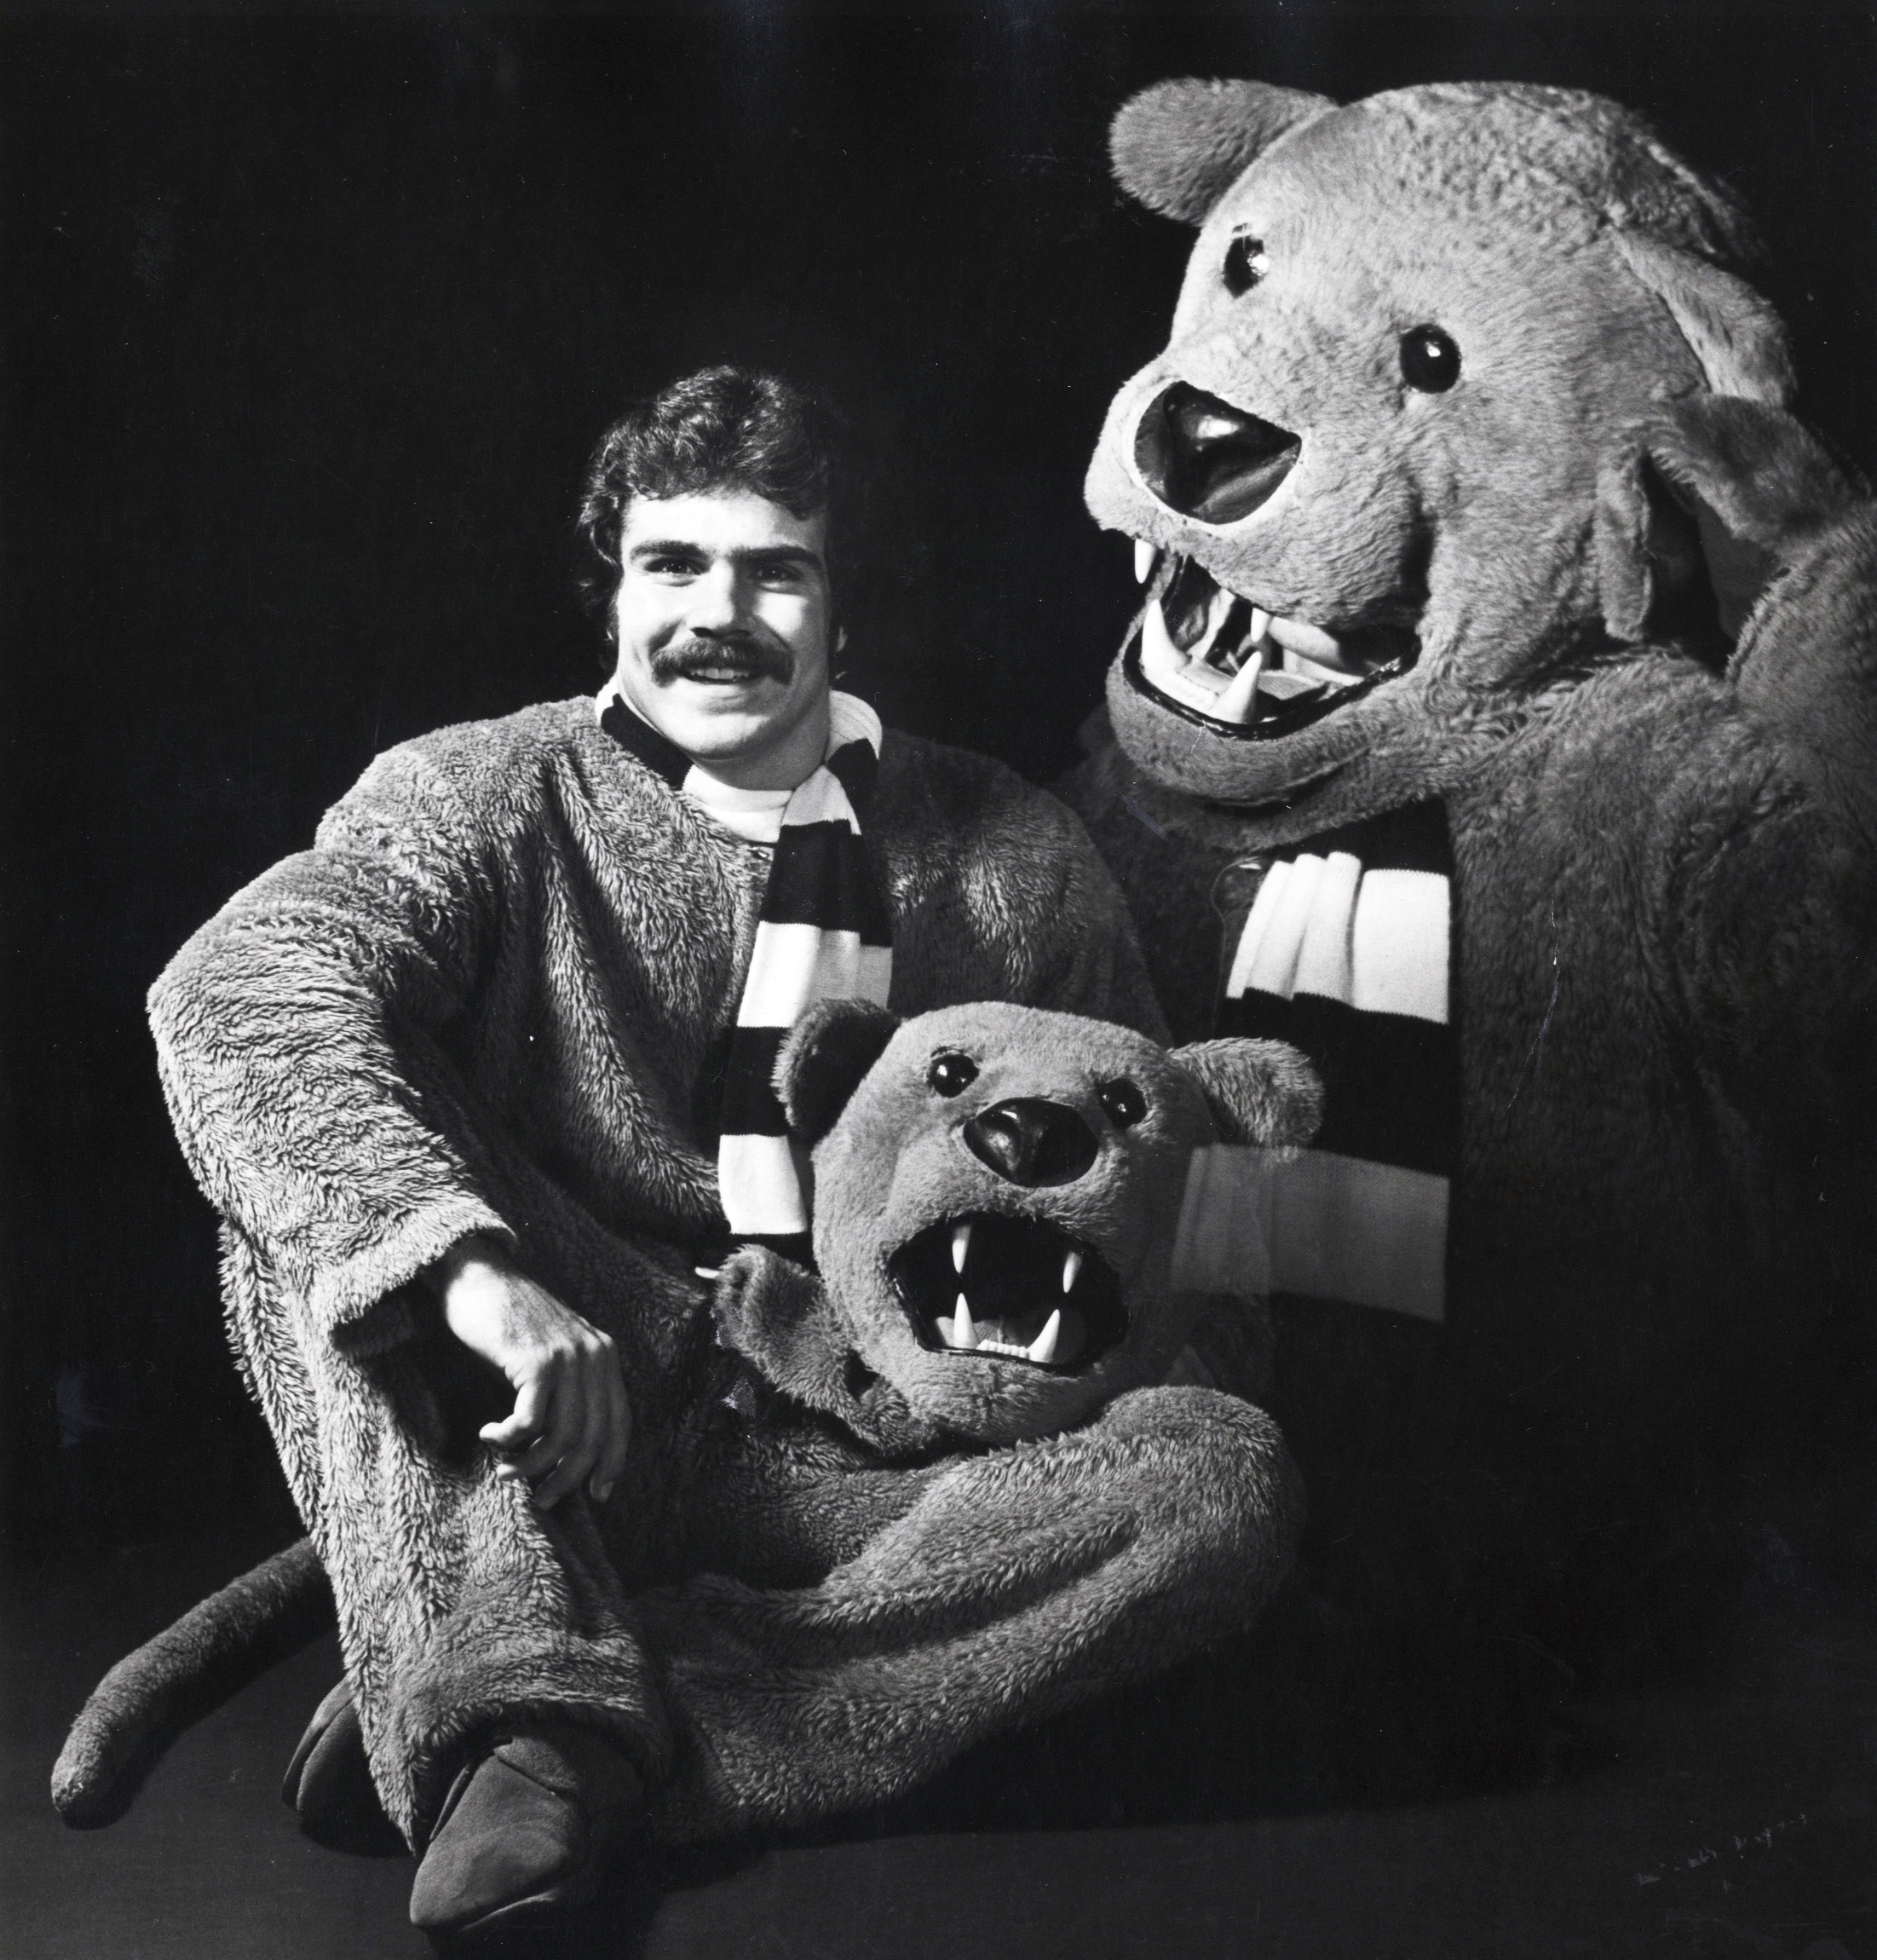 Cliff Fiscus wearing the Nittany Lion suit, courtesy Penn State